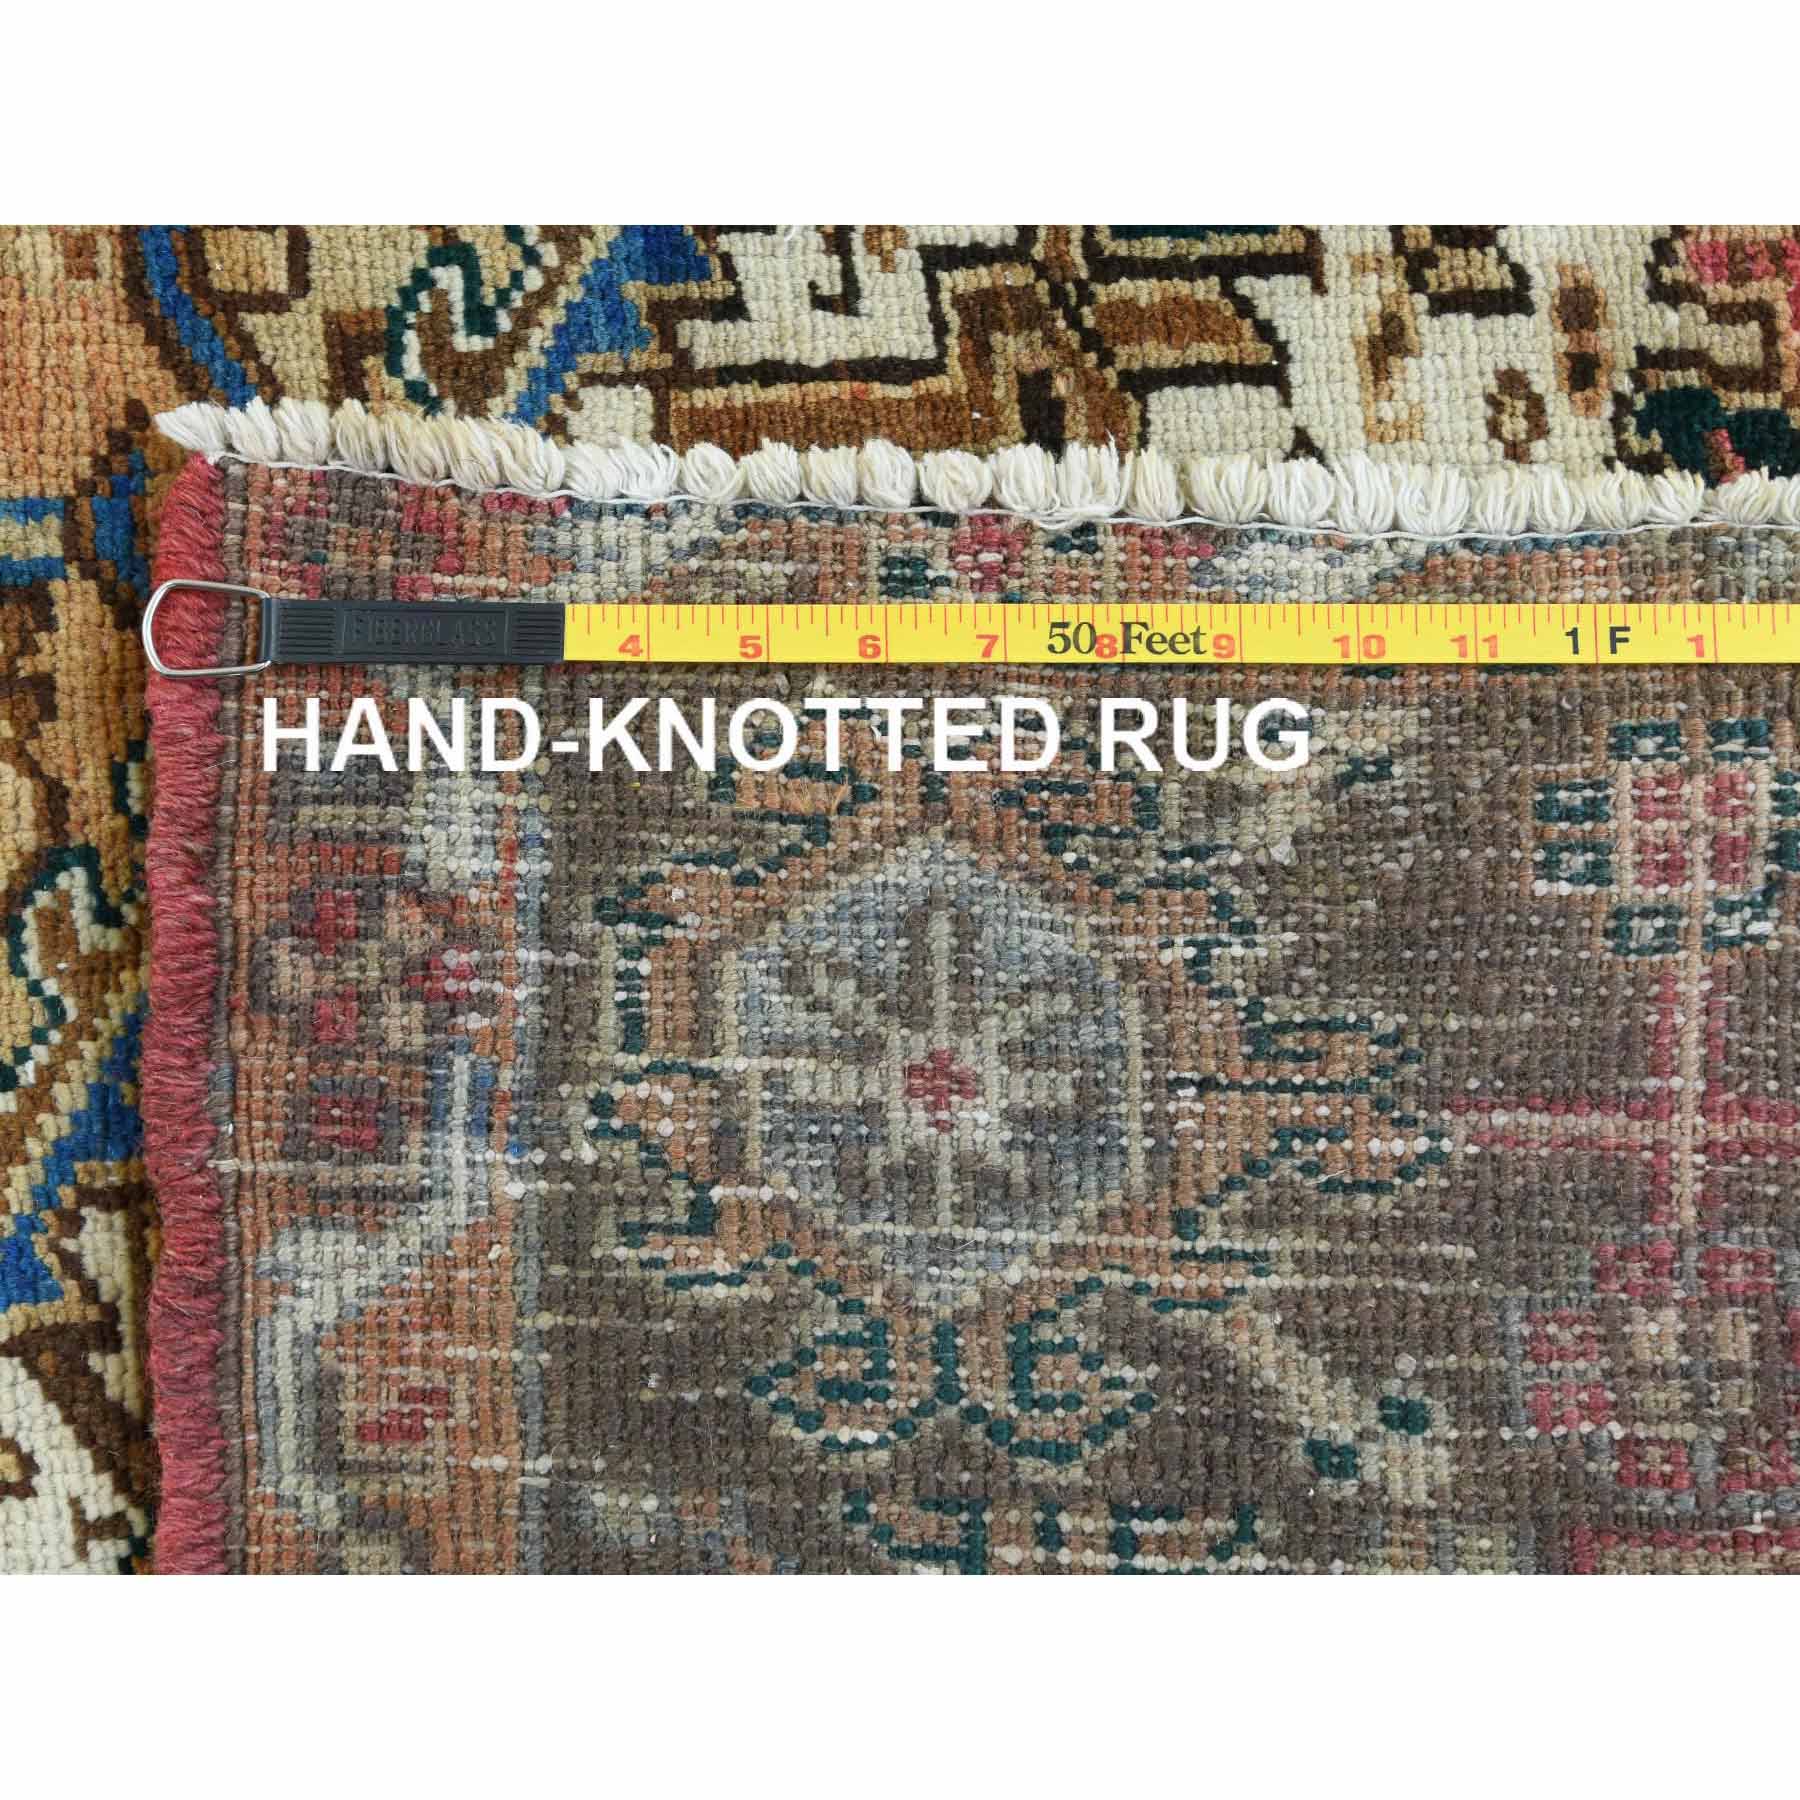 Overdyed-Vintage-Hand-Knotted-Rug-410605